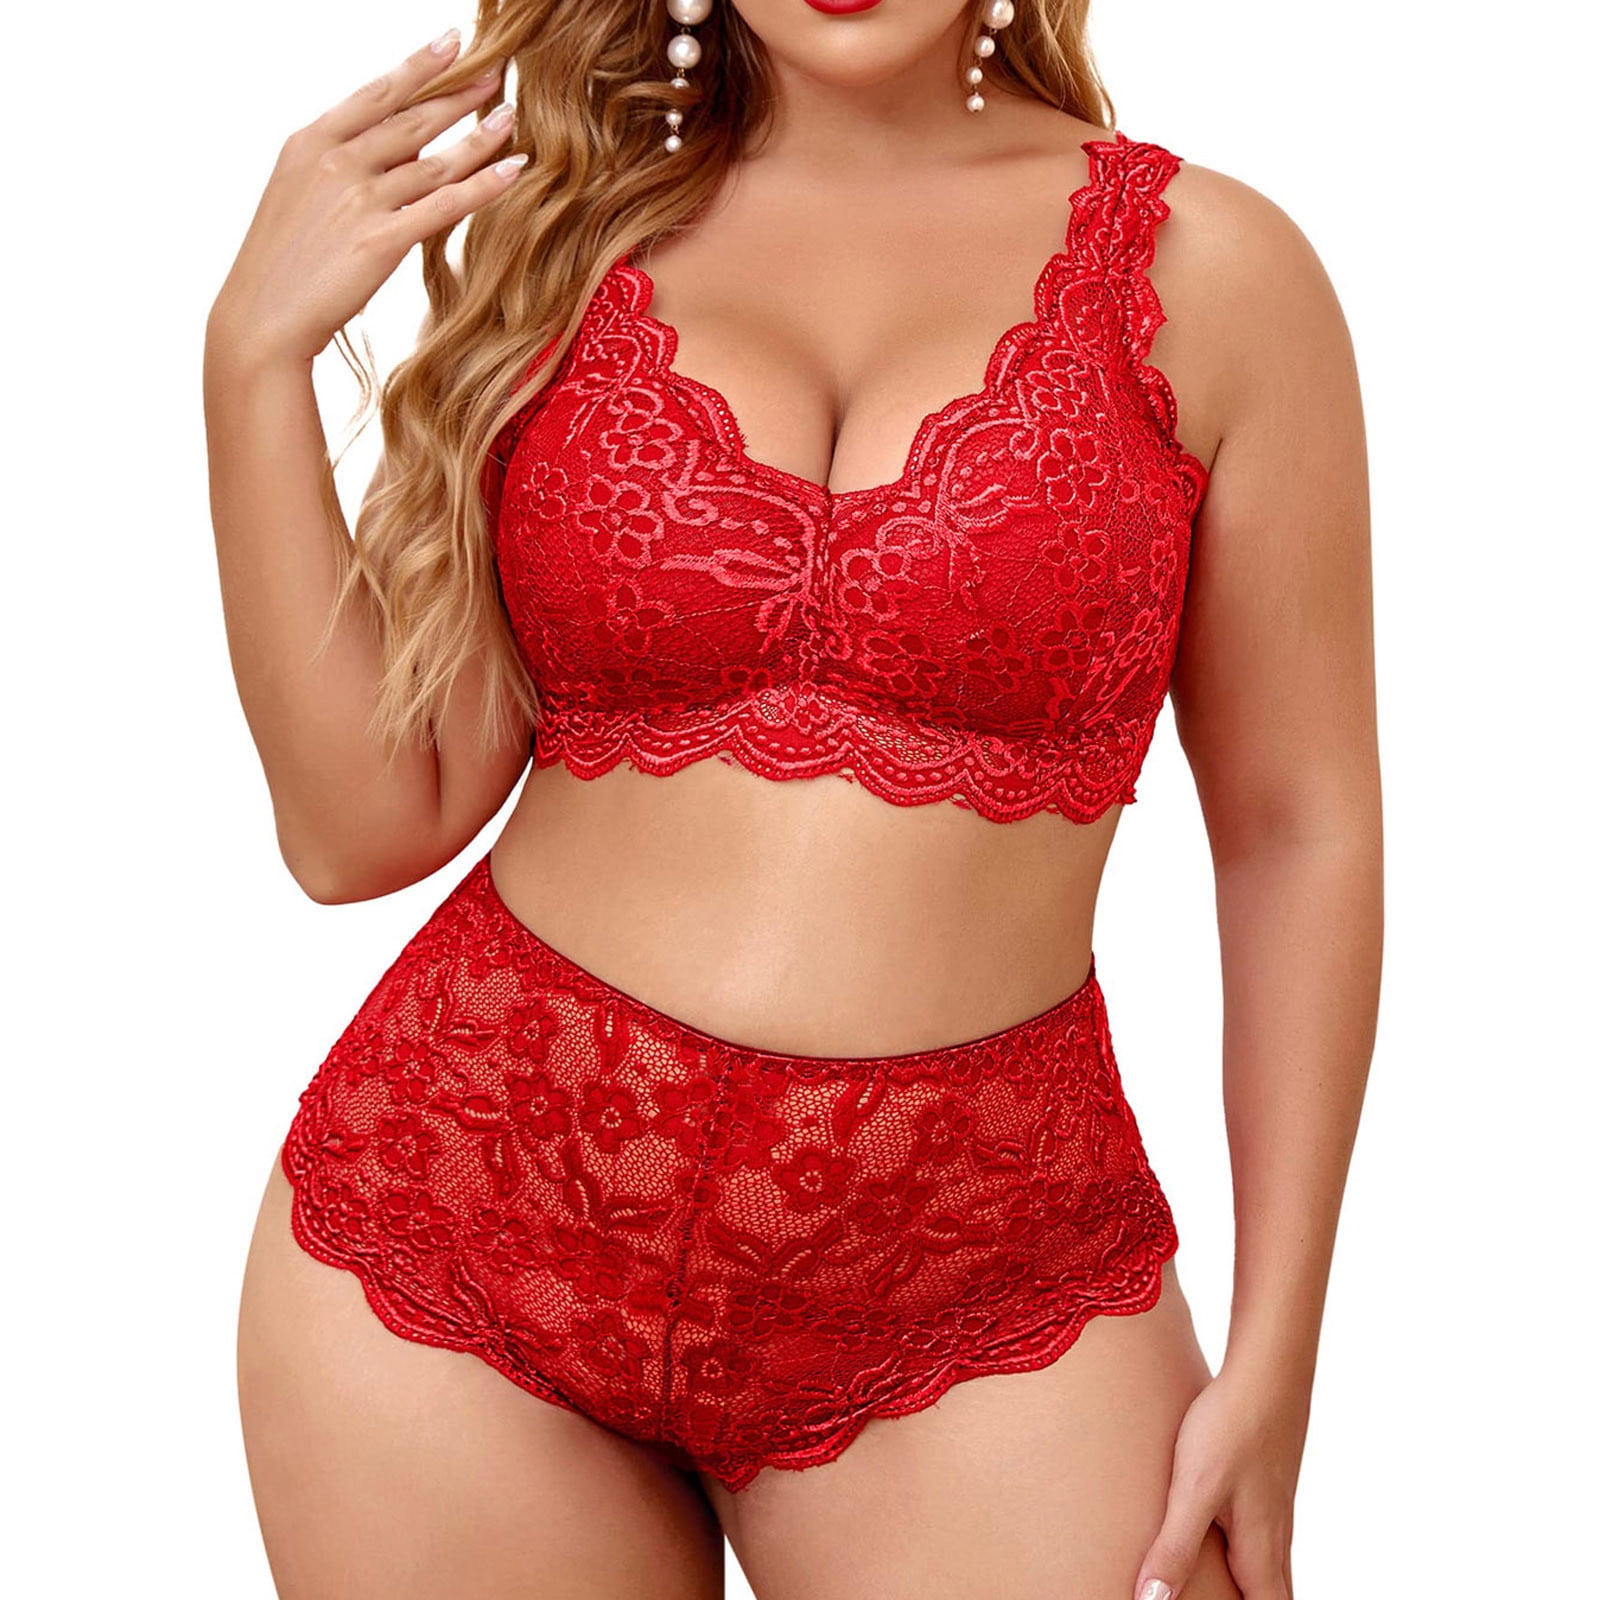 Vedolay Matching Bra And Panty Sets Plus Size 2 Piece Lingerie for Women  Strappy Bra and Panty Underwear Sets Lace Underwear Set for Women(Red,3XL)